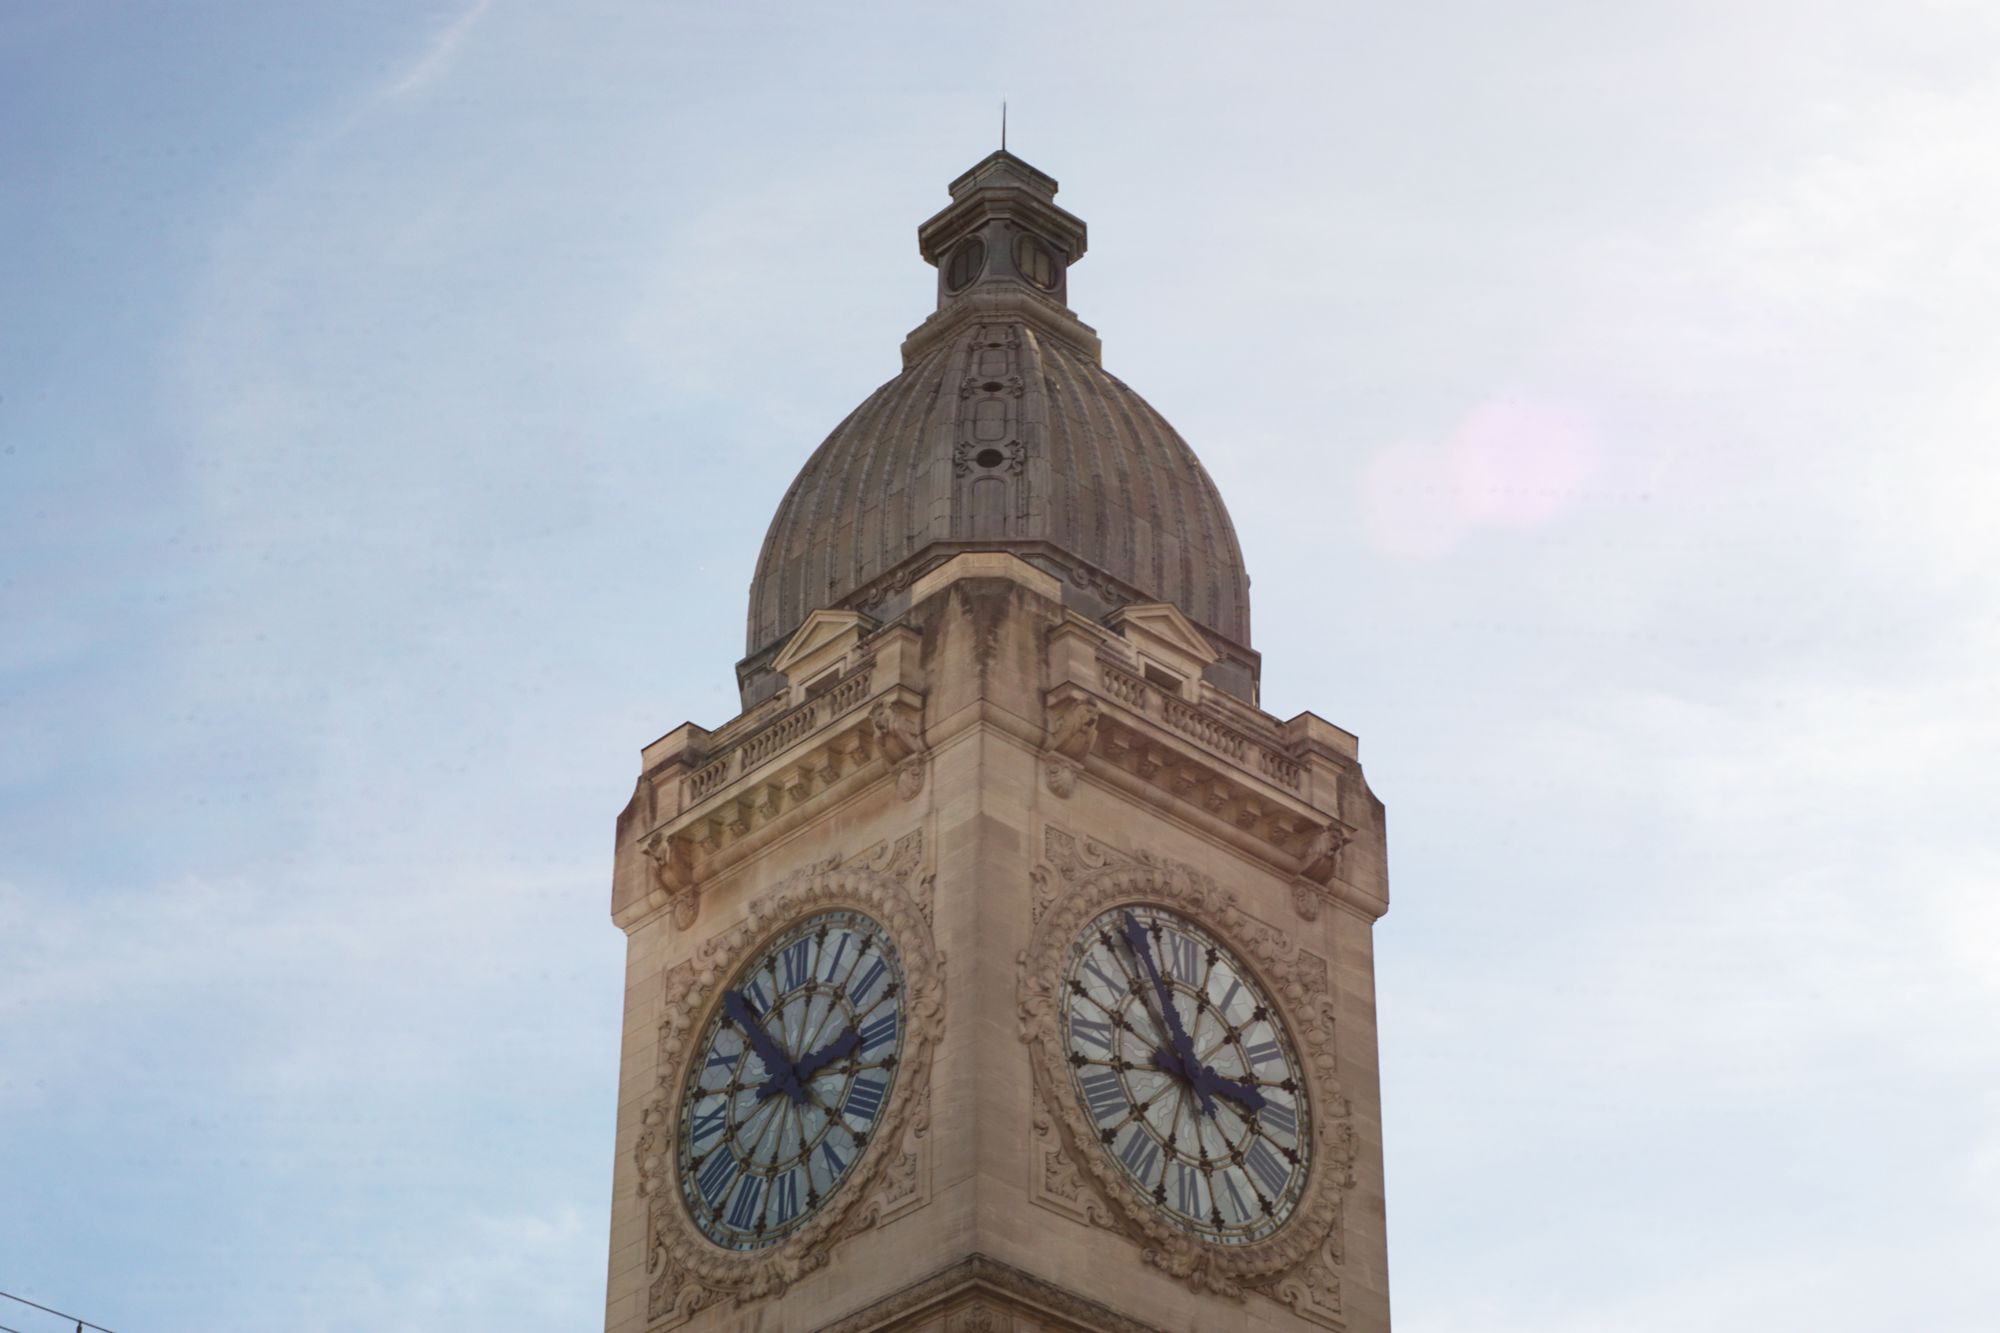 Telephoto shot of a limestone clock tower on a sunny day showing 2:55. The image is slightly streaked with small grey droplets where cleaning fluid hadn't dried on the sensor.